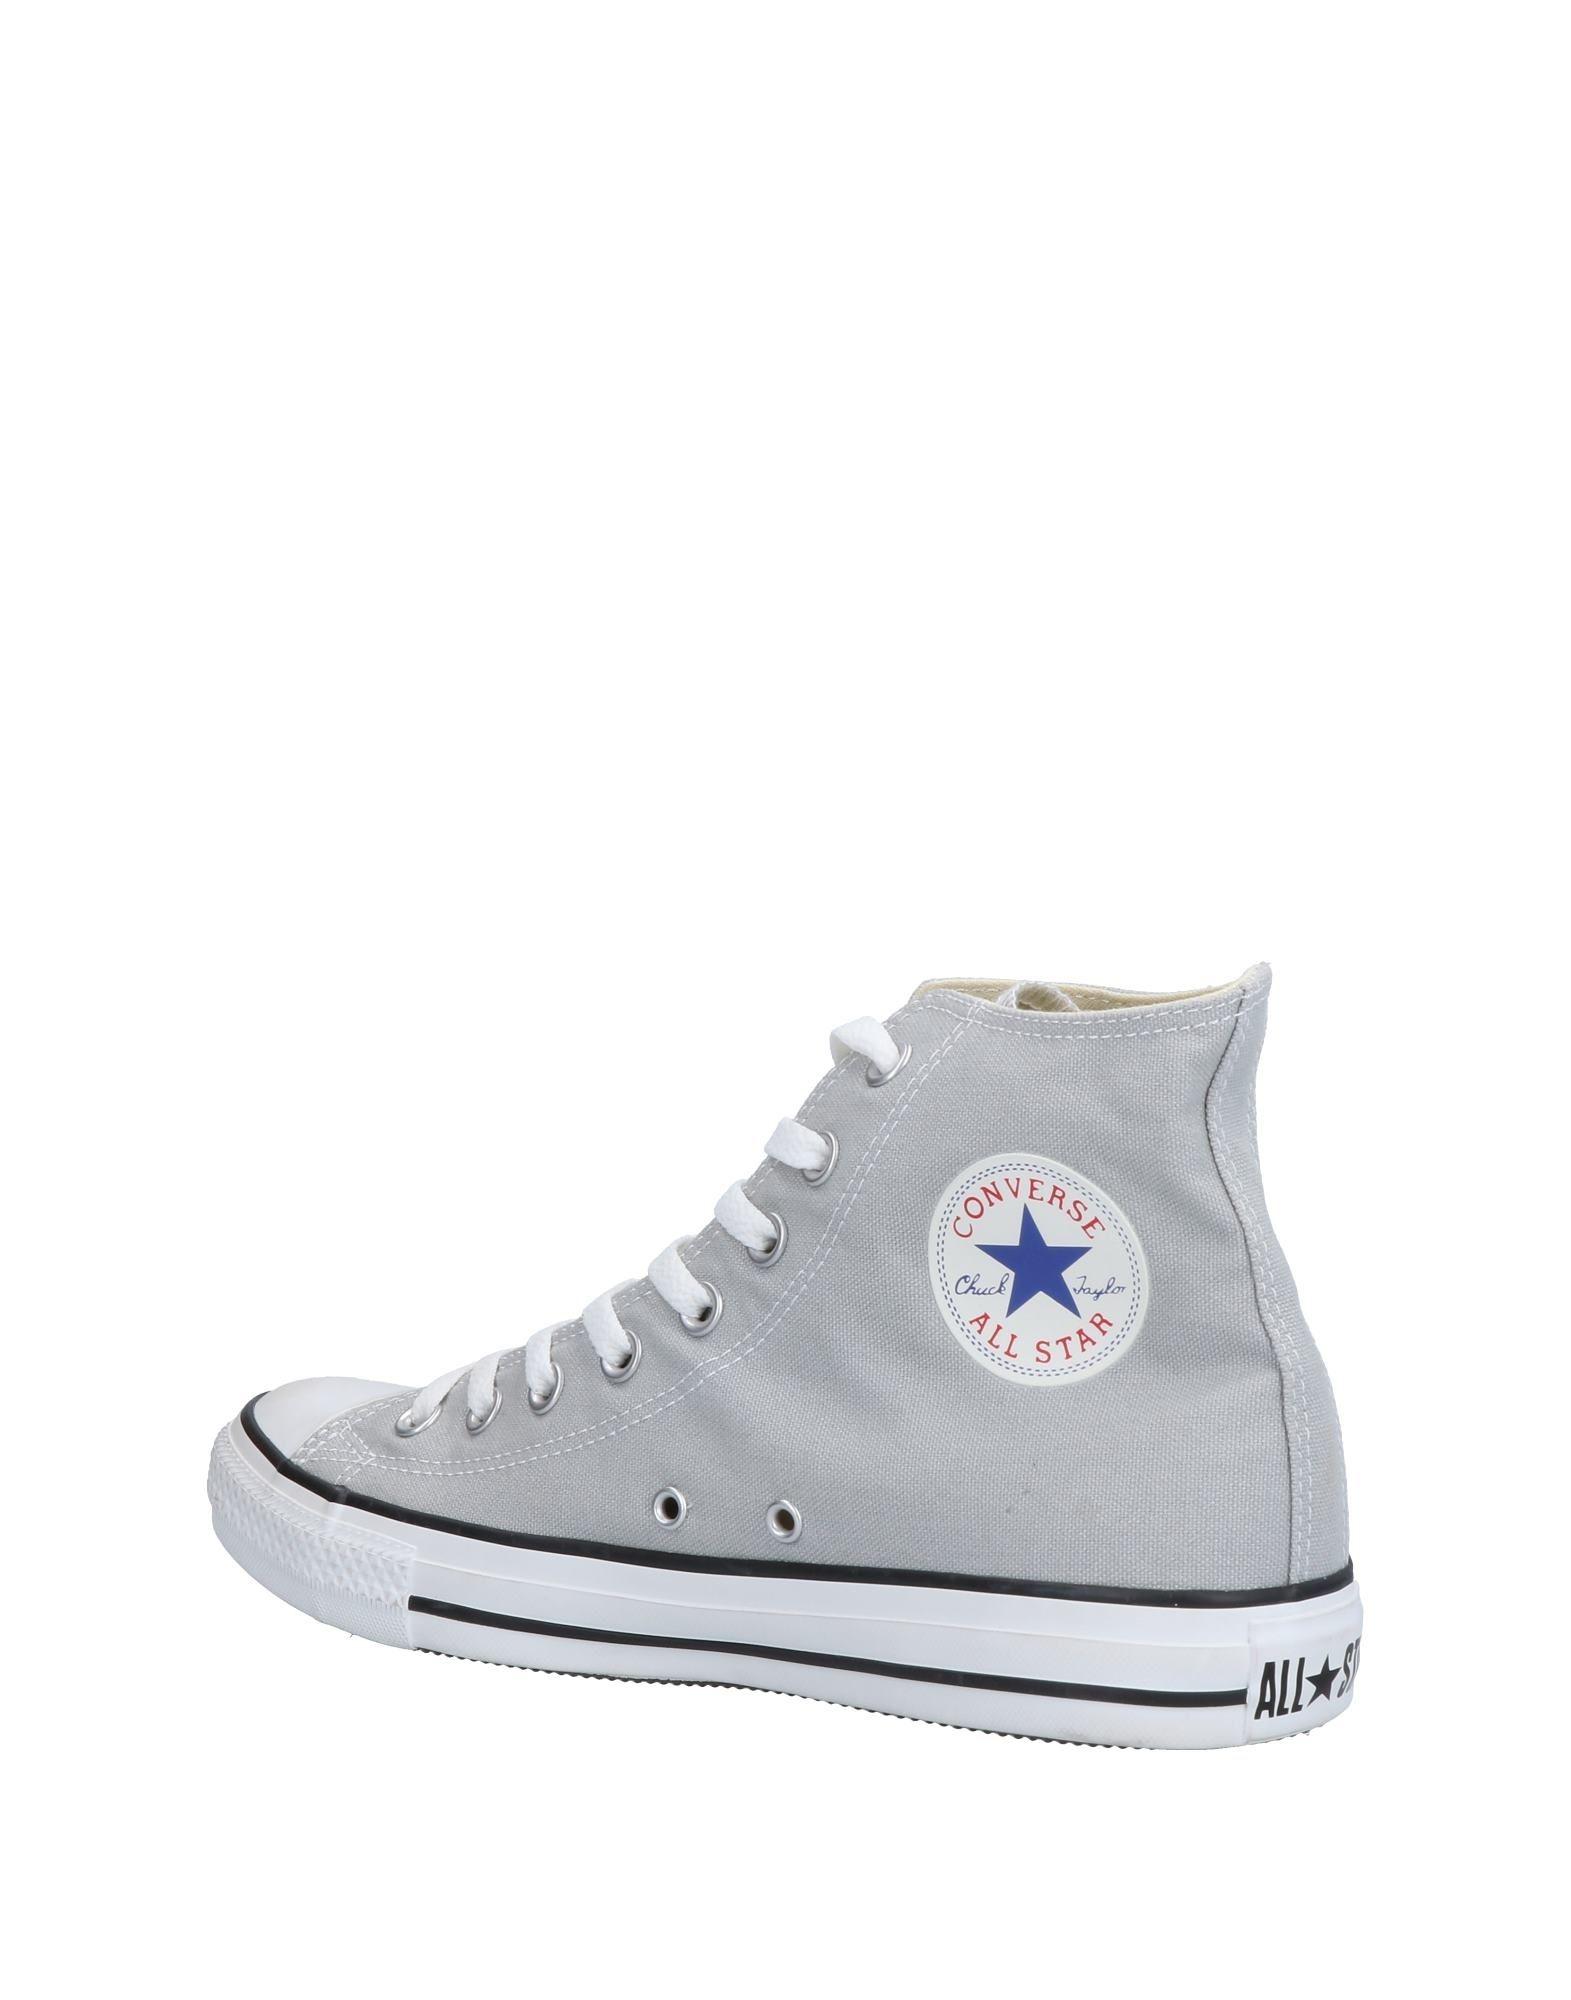 shield space sarcoma Converse High-tops & Sneakers in Gray for Men | Lyst